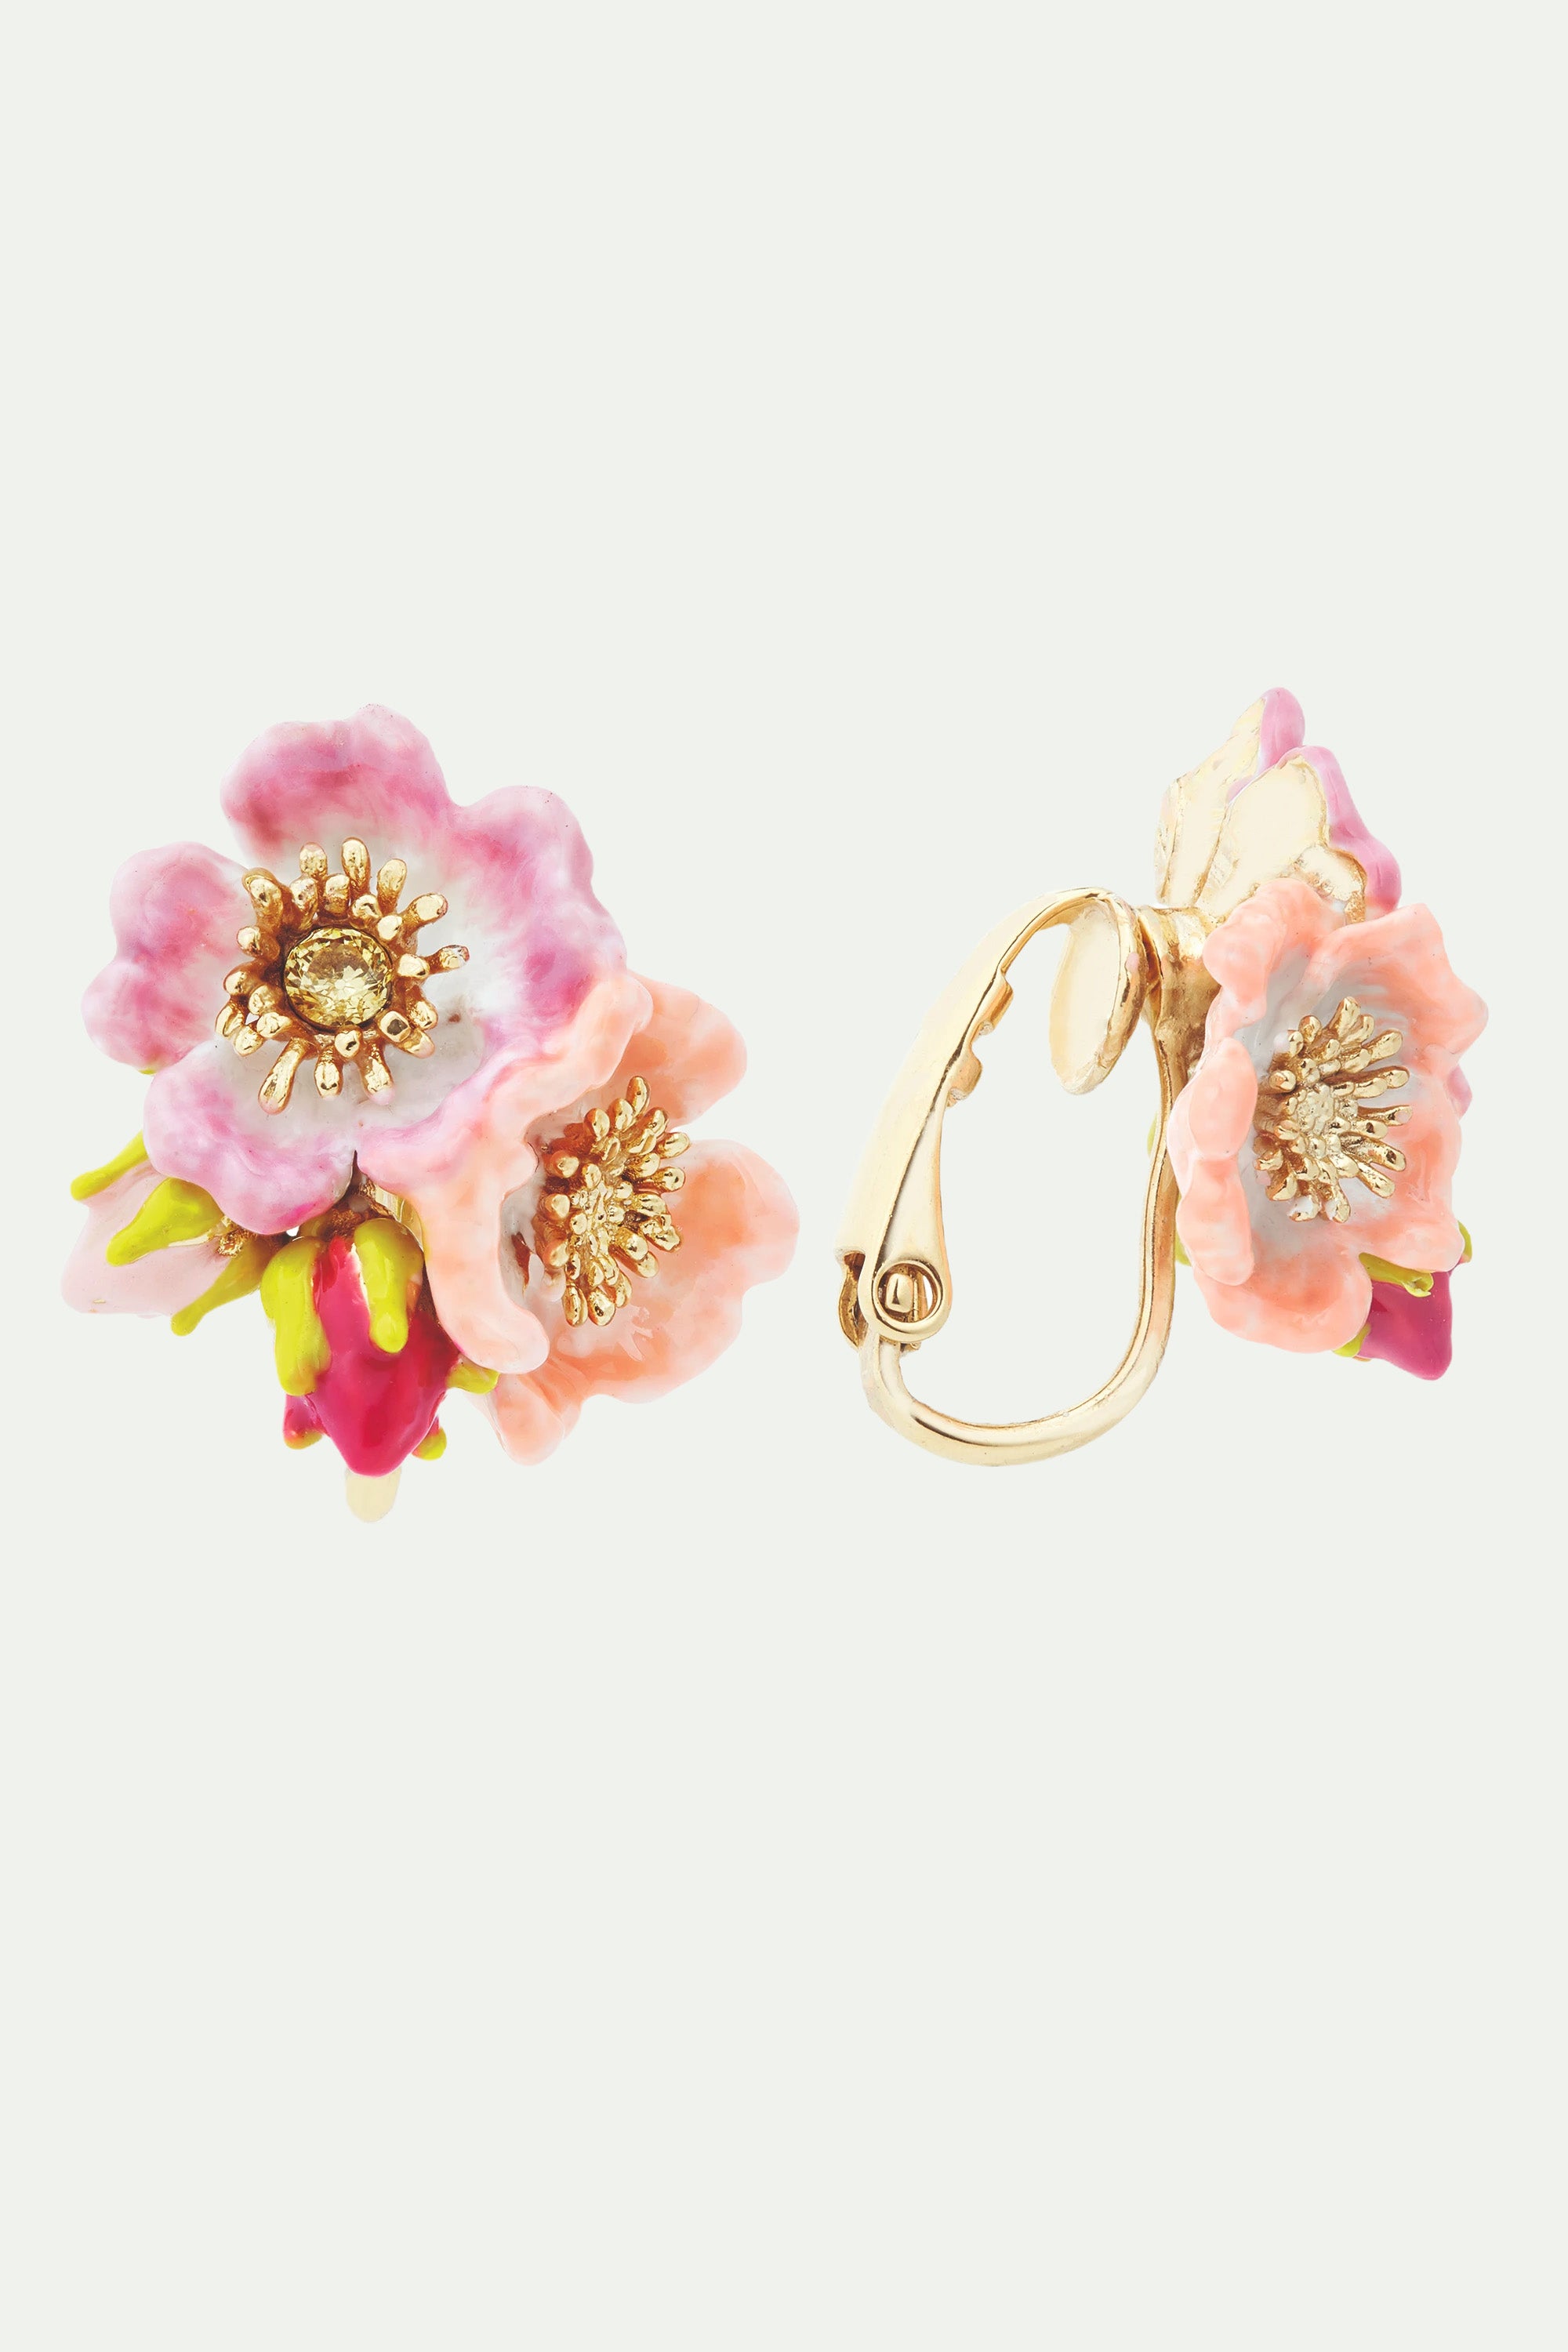 Wild rose and yellow cristal post earrings